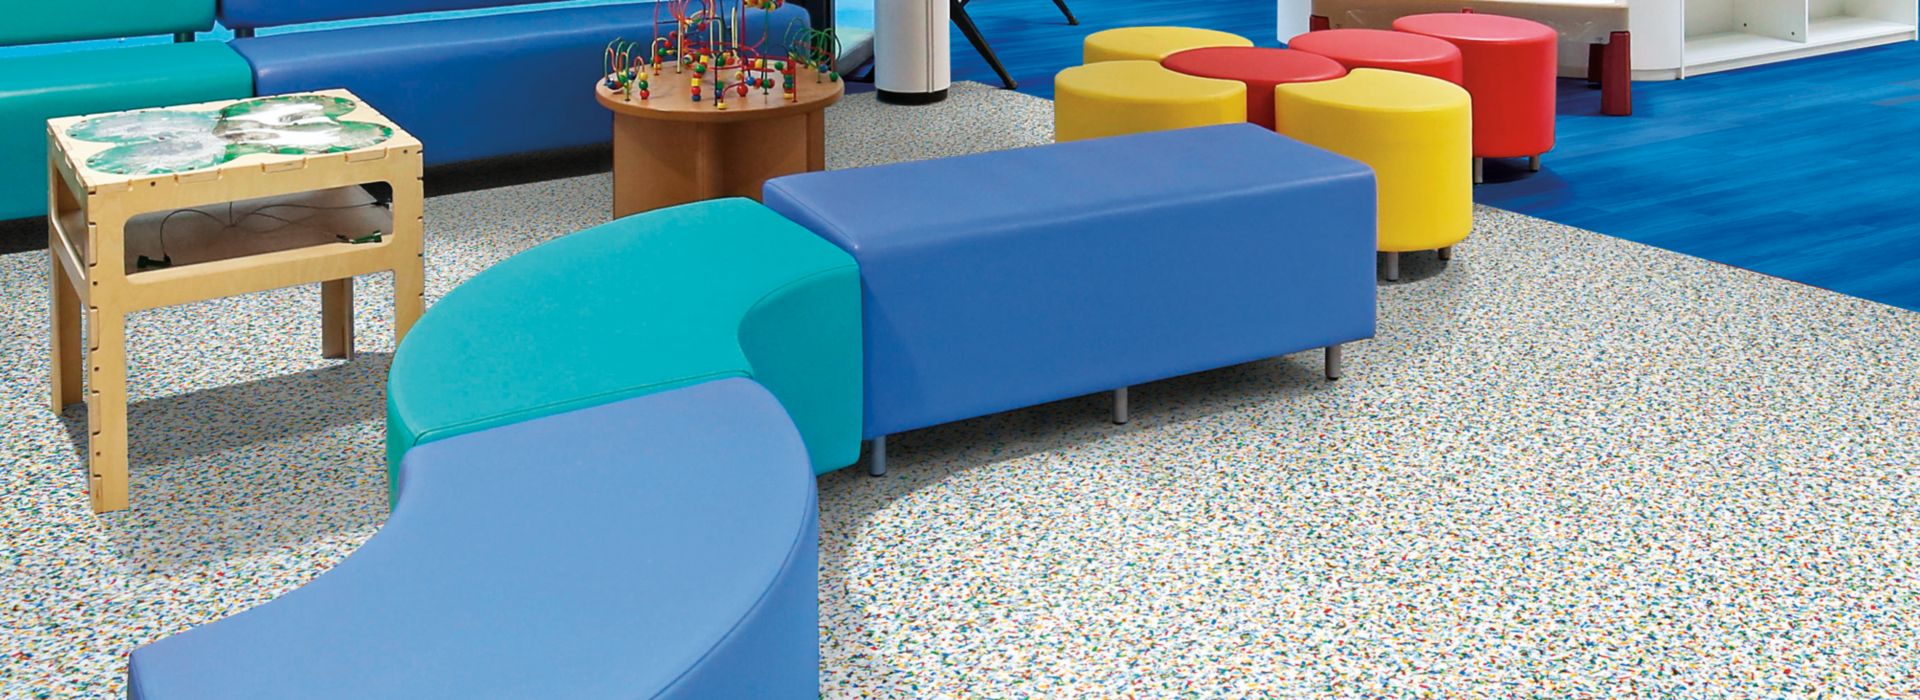 Interface Walk on By and Studio Set LVT in children's waiting area with colorful furniture afbeeldingnummer 1